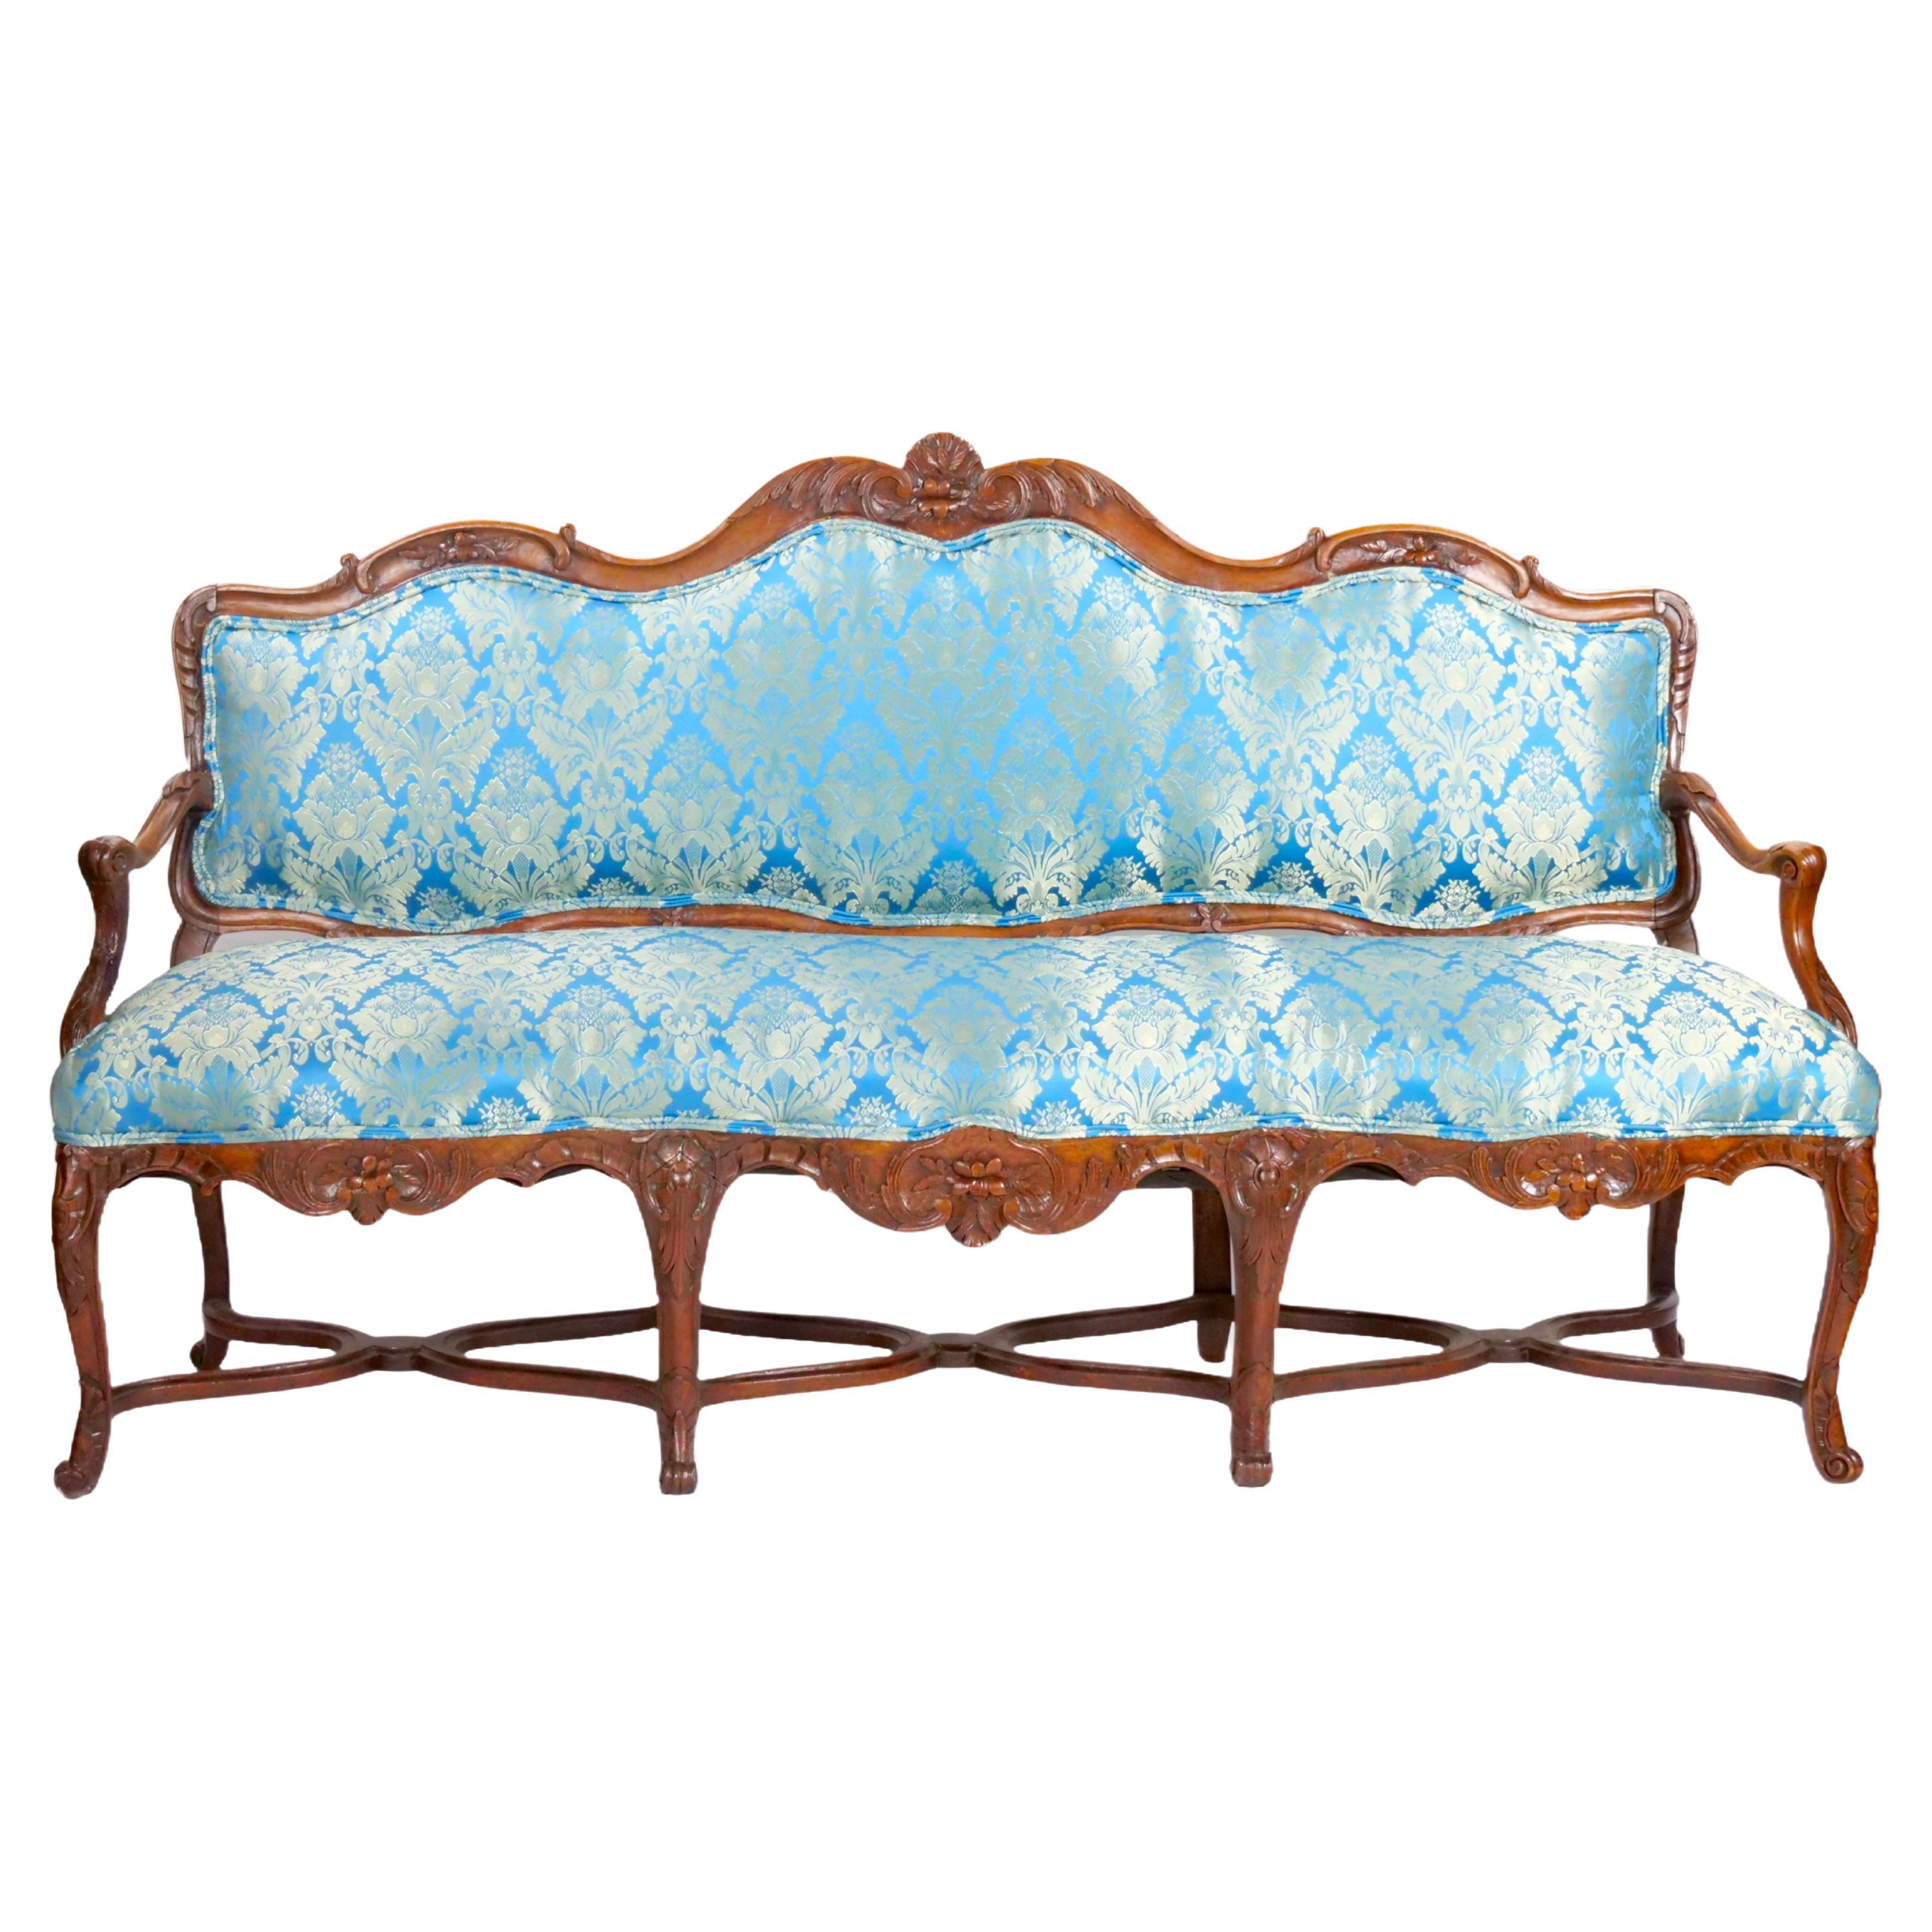 19th Century French Walnut Upholstered Three Seat Settee